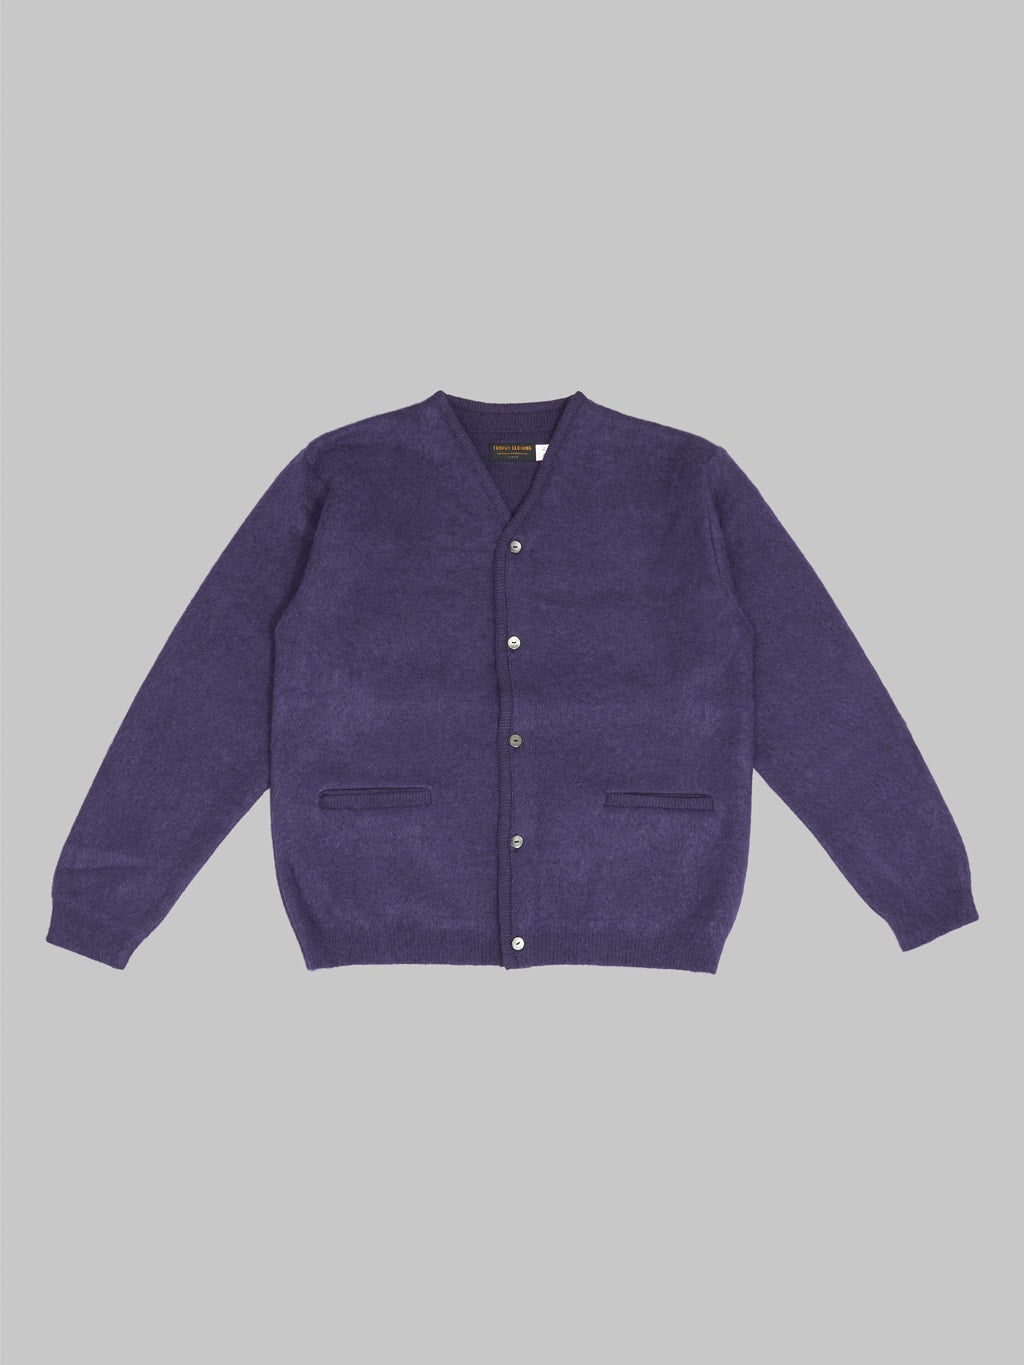 Trophy Clothing Mohair Knit Cardigan Dark Purple front